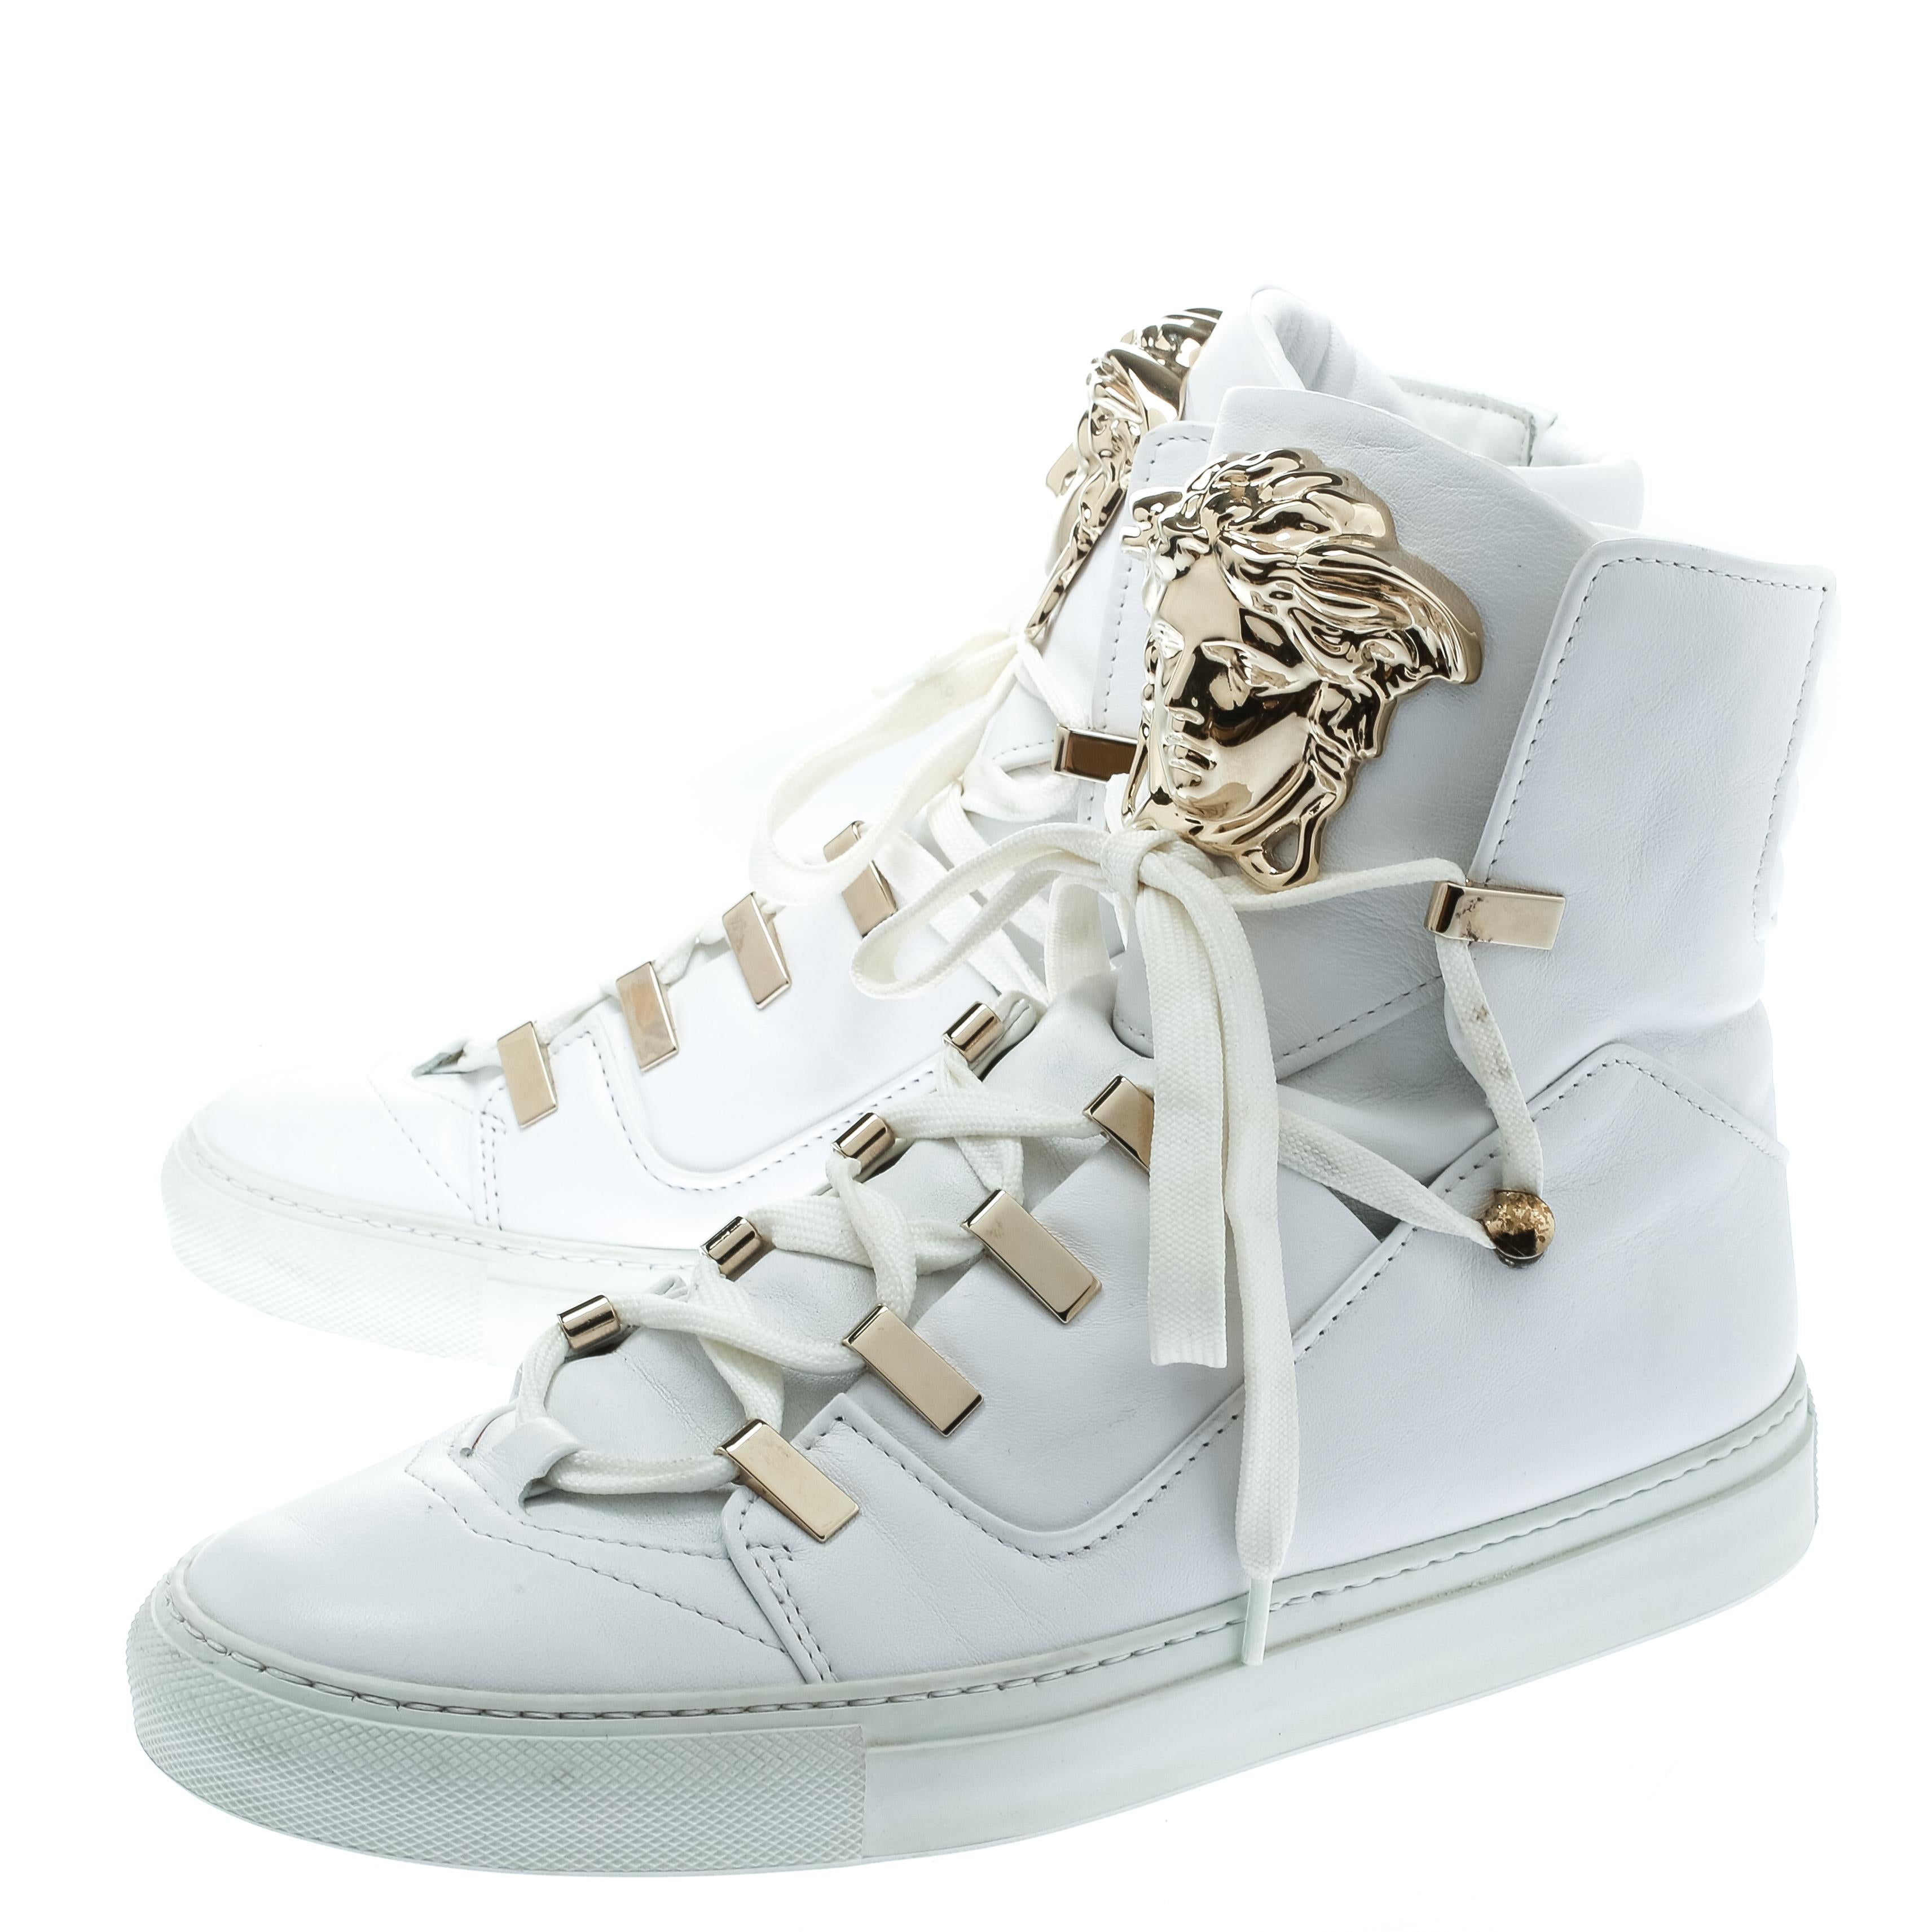 Gray Versace White Leather Medusa High Top Sneakers Size 39